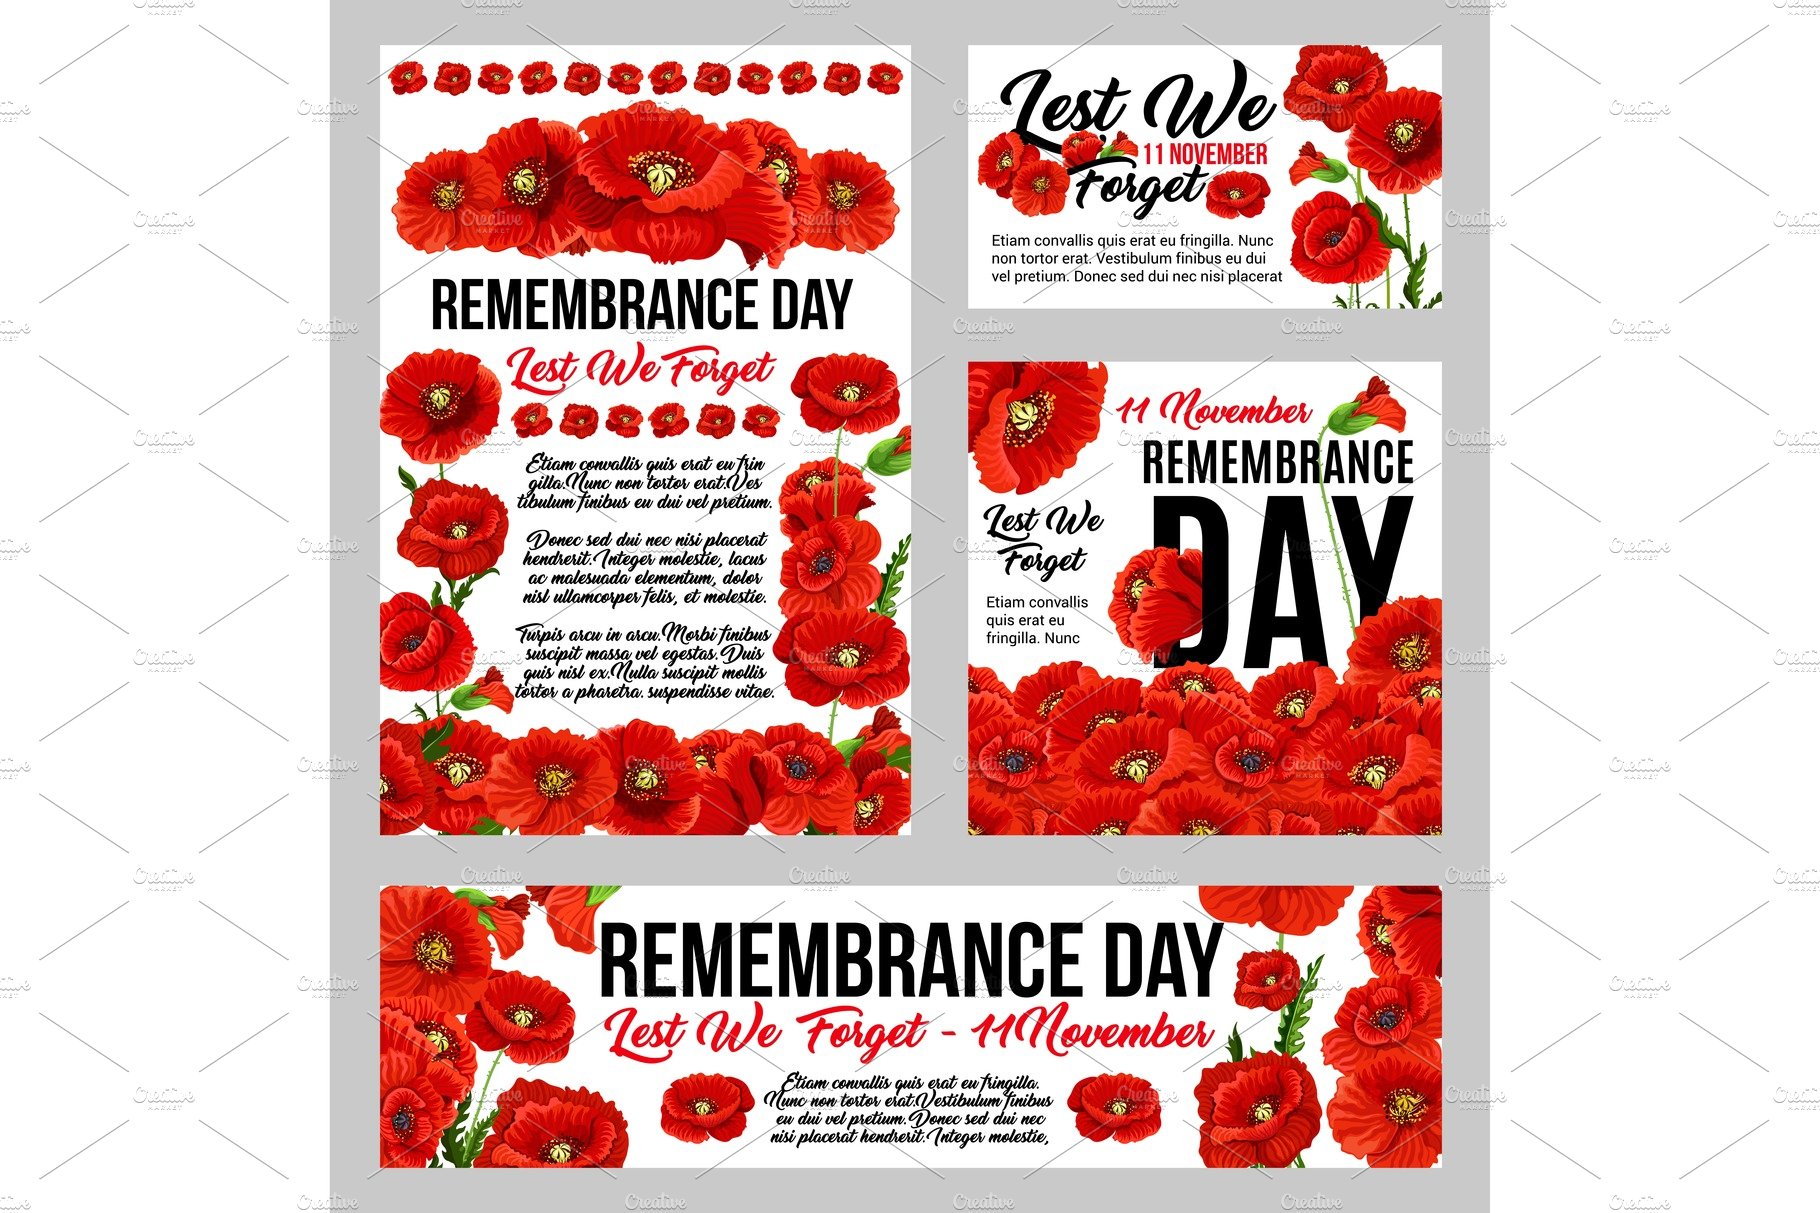 Remembrance Day poppy flower cover image.